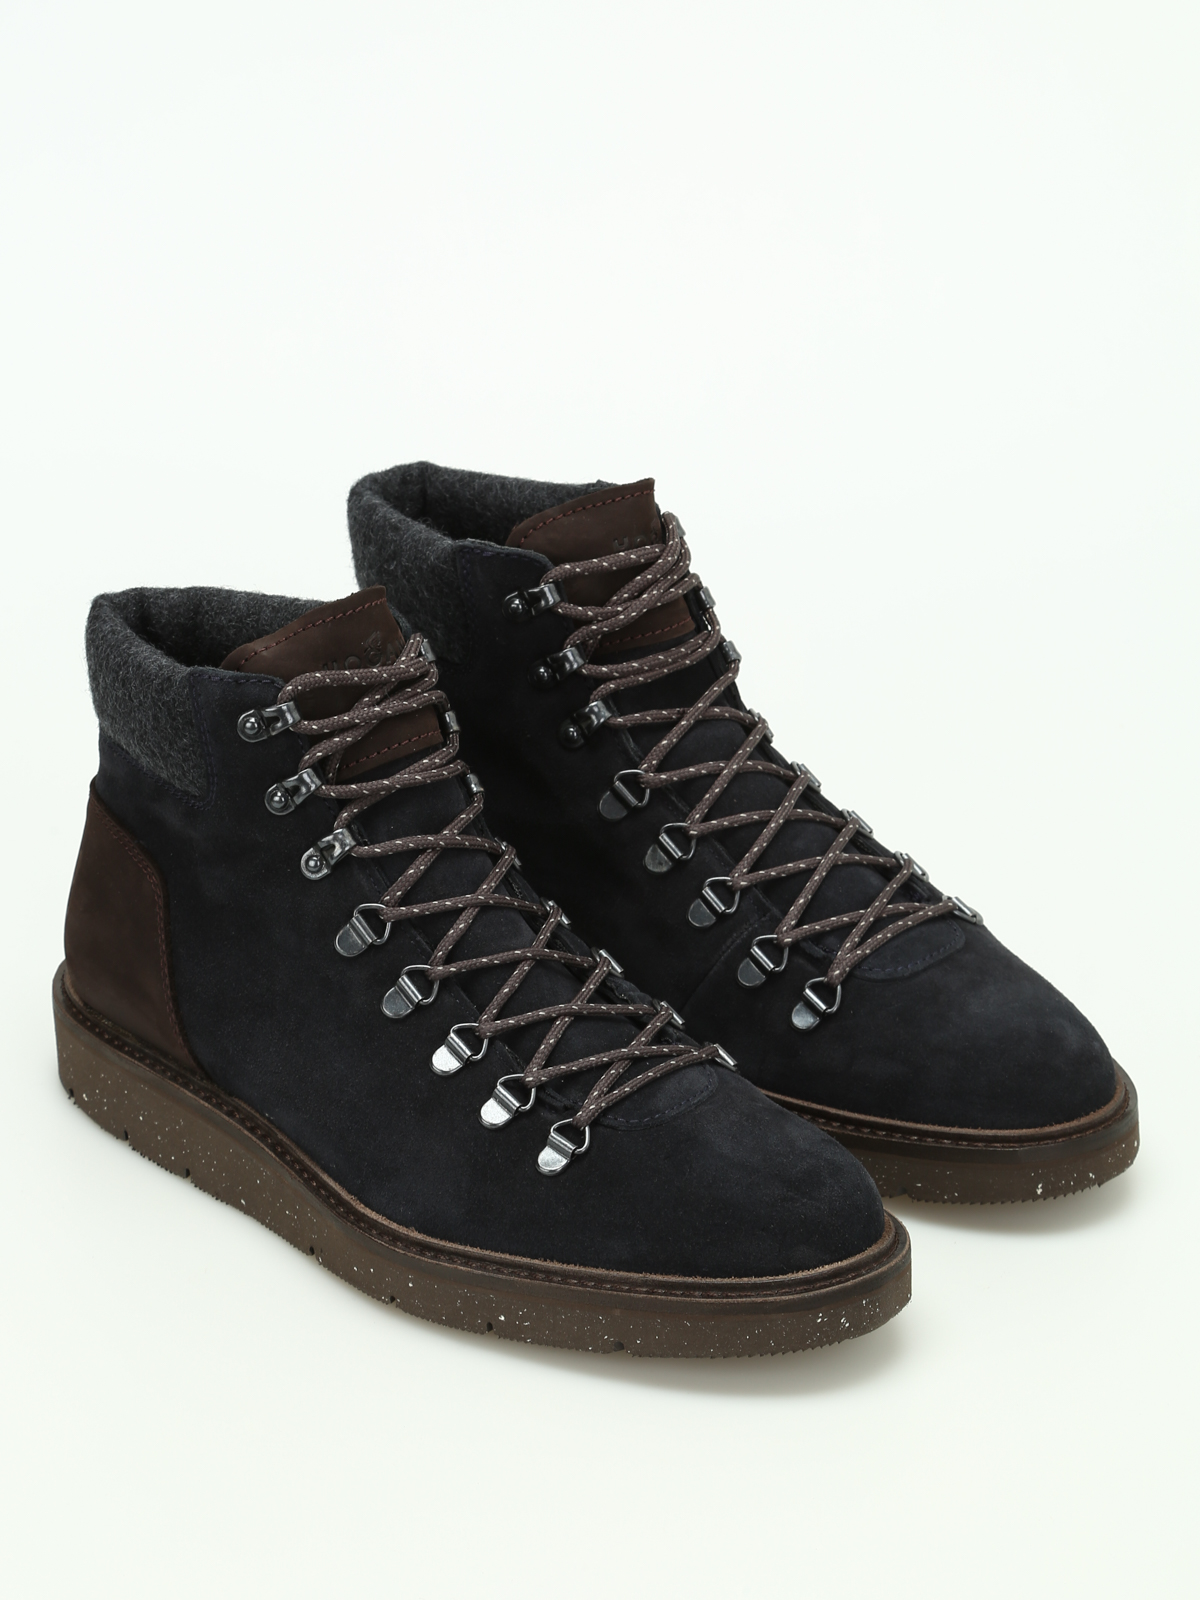 Hogan - H334 hiking boots - ankle boots 